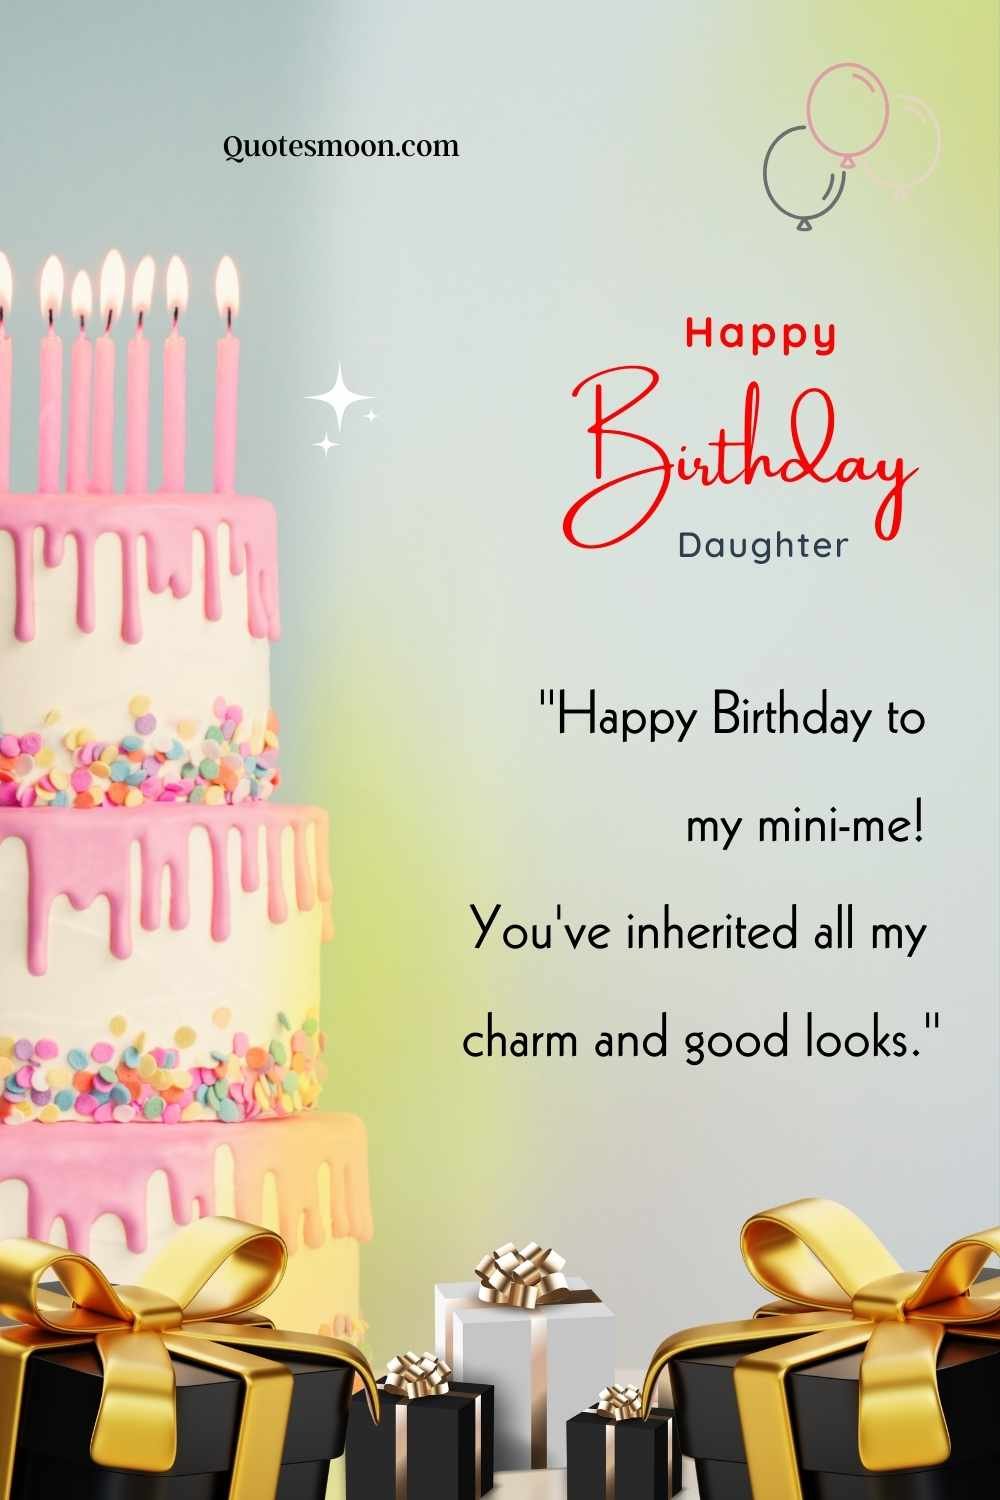 Heartwarming Birthday Wishes For Daughter with images